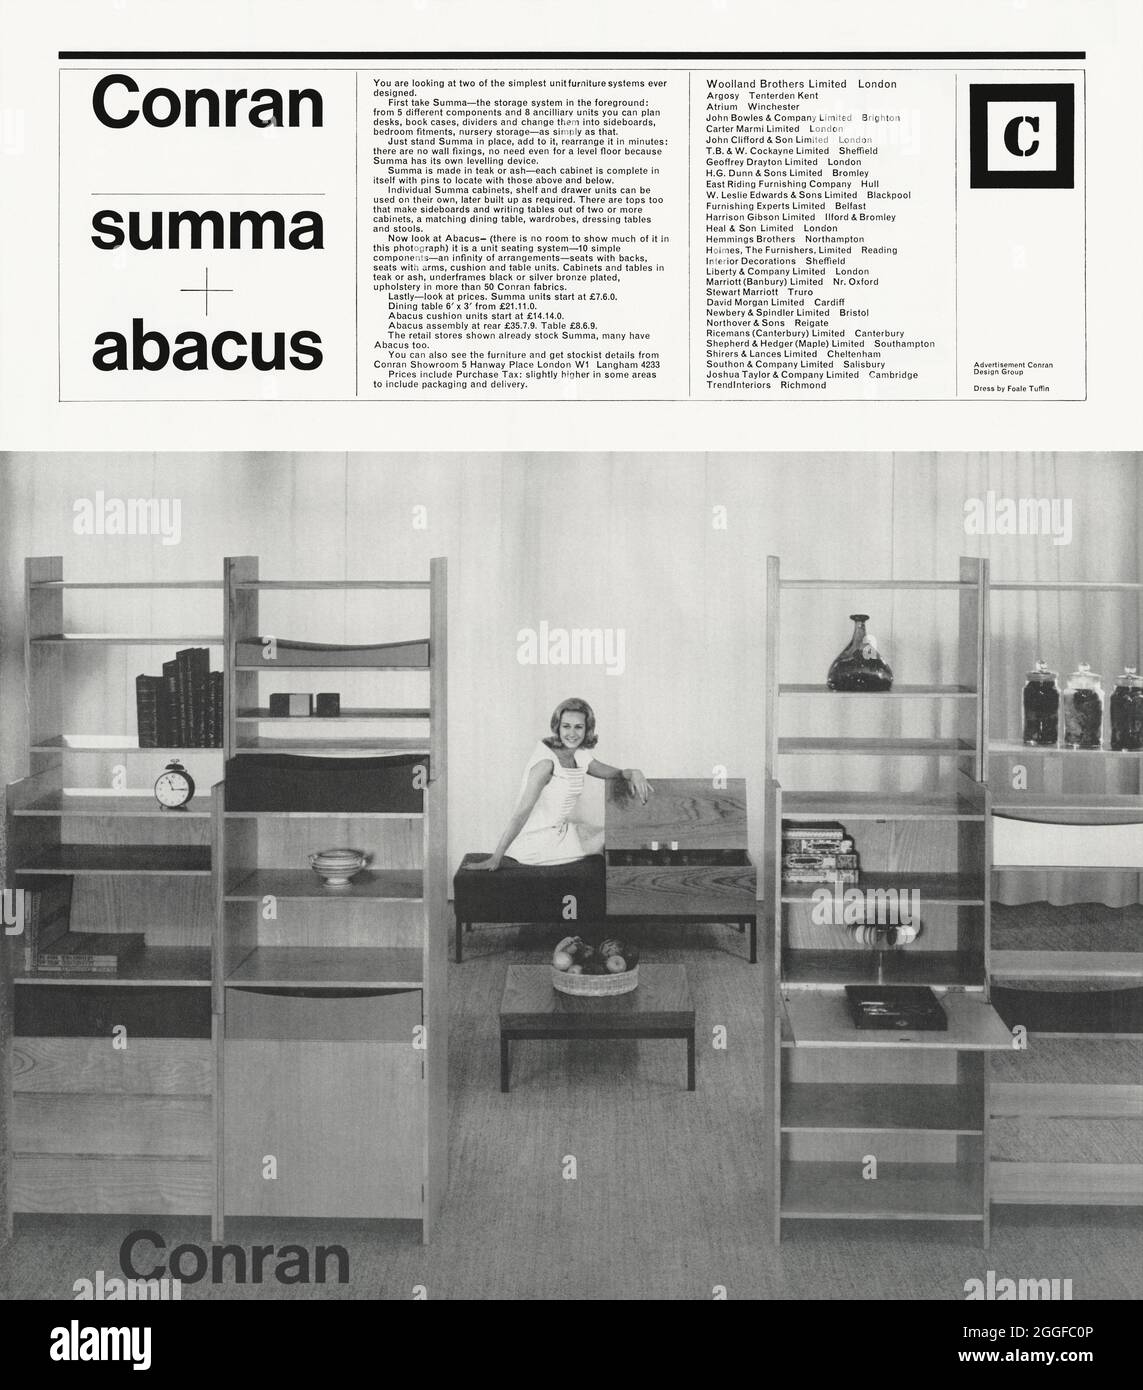 A 1960s advert for furniture designed by Terrance Conran – on show at the Conran Showroom, Hanway Place, London, England, UK. The advert appeared in a magazine published in the UK in October 1962. The photograph shows the ‘Summa’ storage system and the ‘Abacus’ seating and coffee table. Sir Terence Orby Conran (1931–2020) was a British designer, restaurateur, retailer and writer. Conran started his own design practice in 1956 with the Summa range of flat-pack furniture, known then as ‘knock-down’. It made well-designed furniture far more accessible – vintage 1960s graphics. Stock Photo